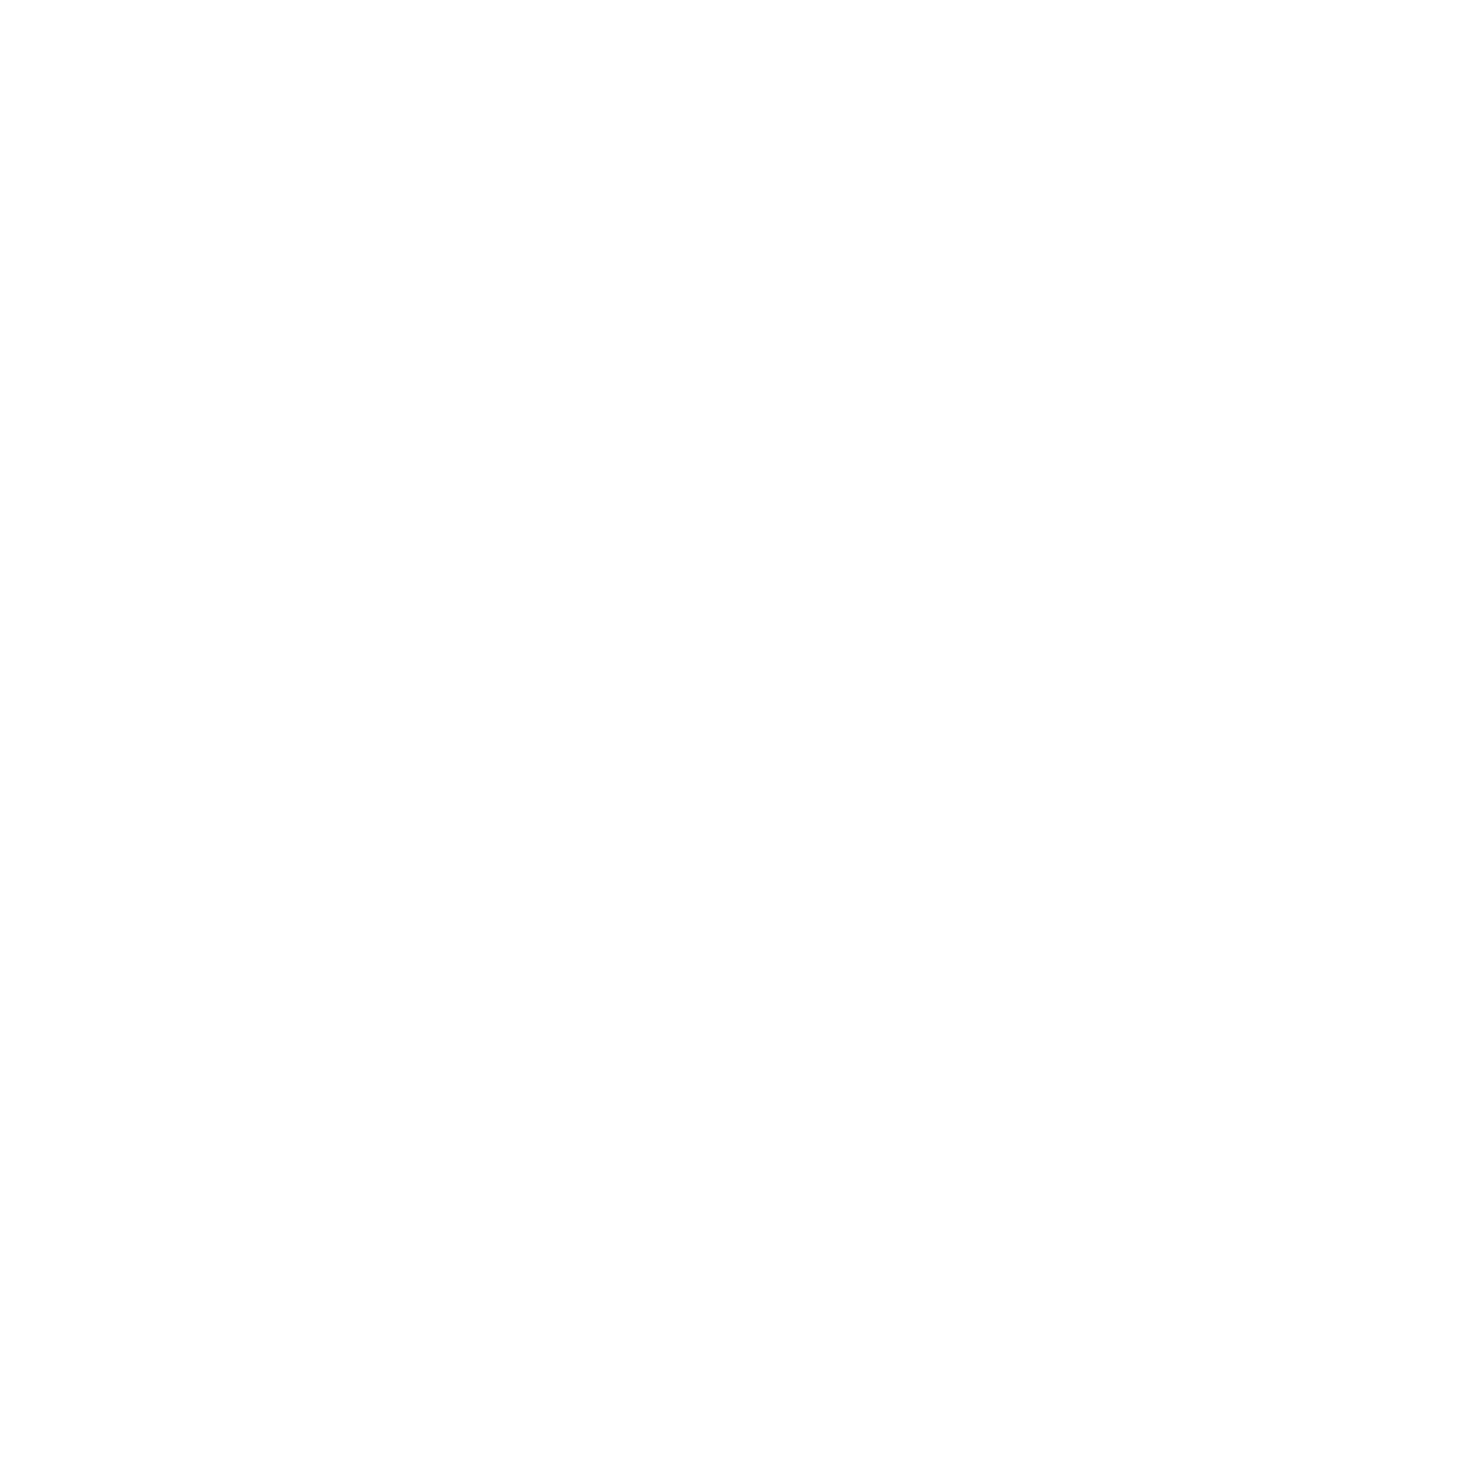 The Last of Us Episode 4 HBO Max Release Date & Time